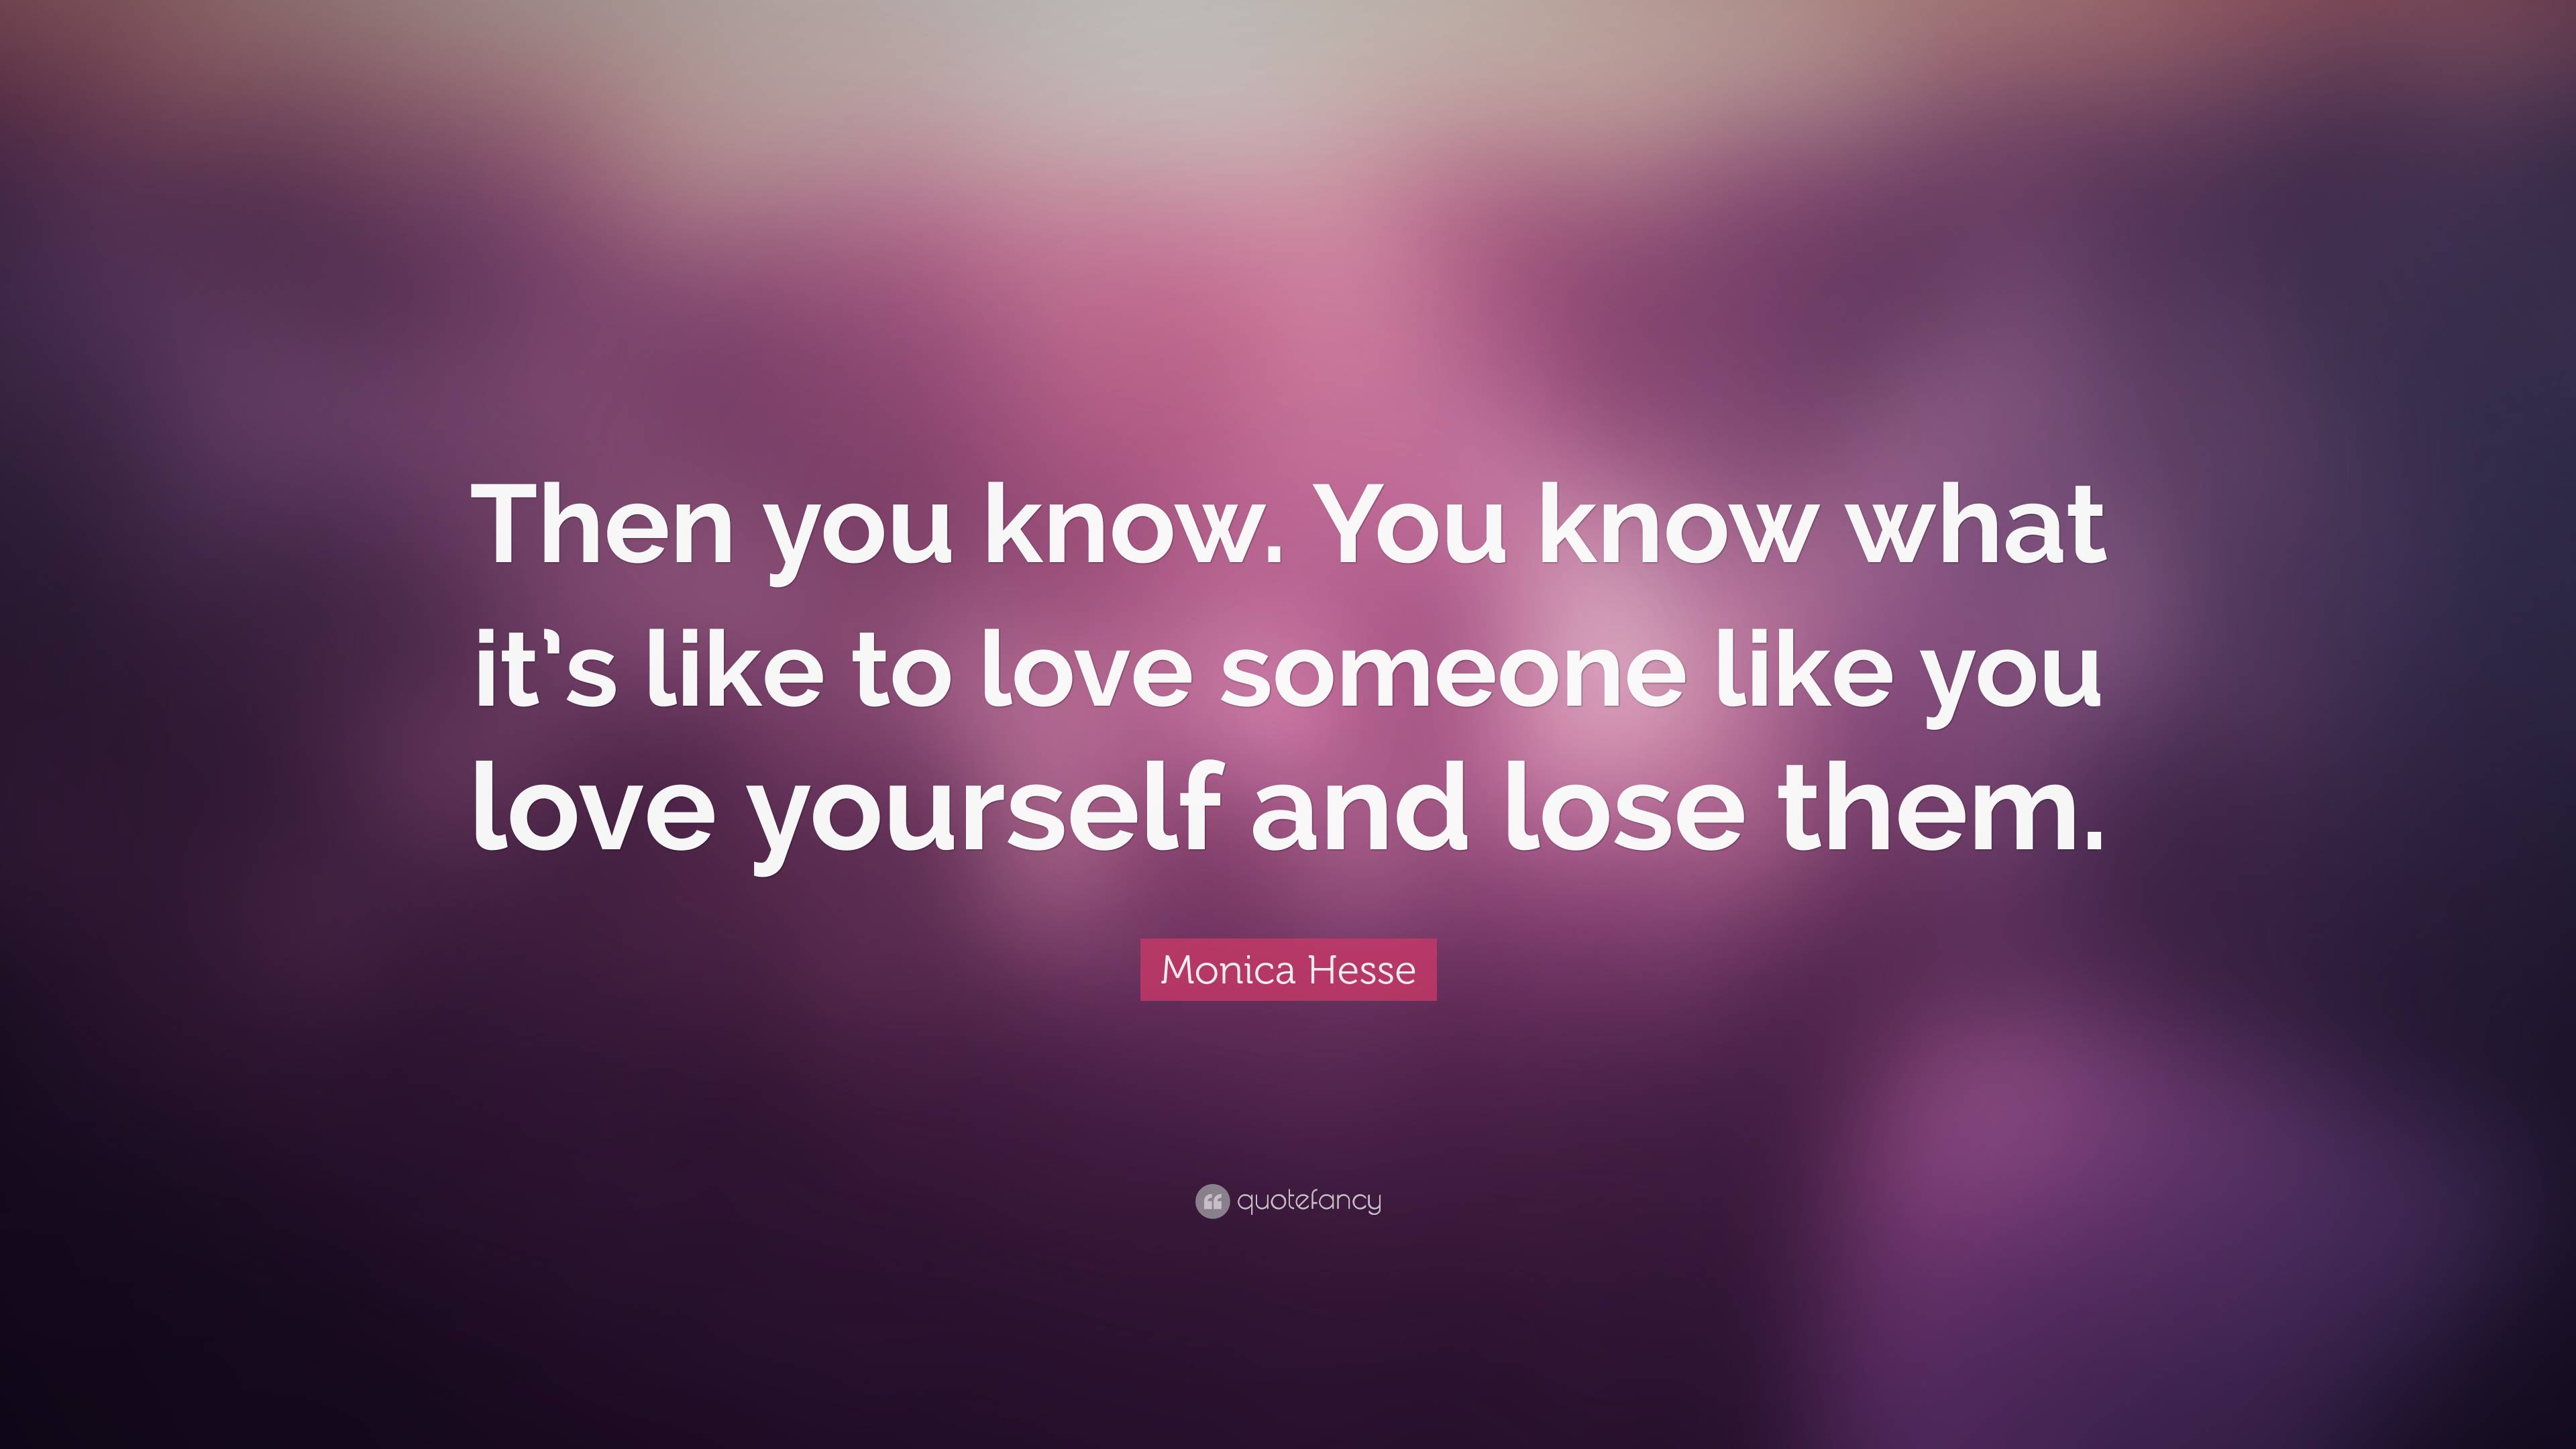 Monica Hesse Quote: “Then you know. You know what it's like to